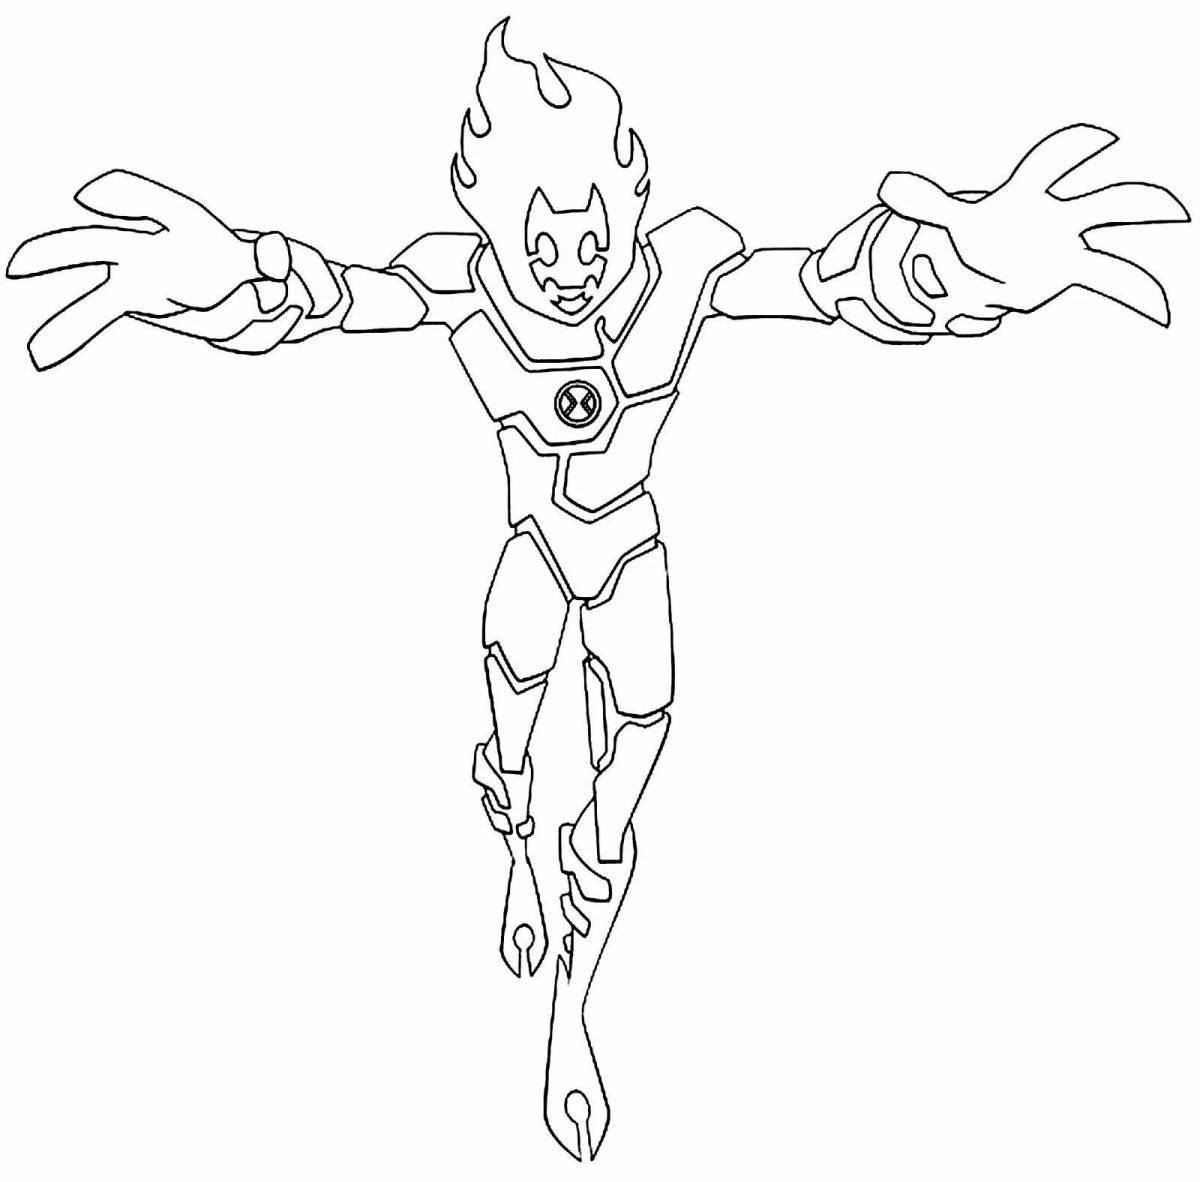 Quirky ben 10 omniverse coloring page